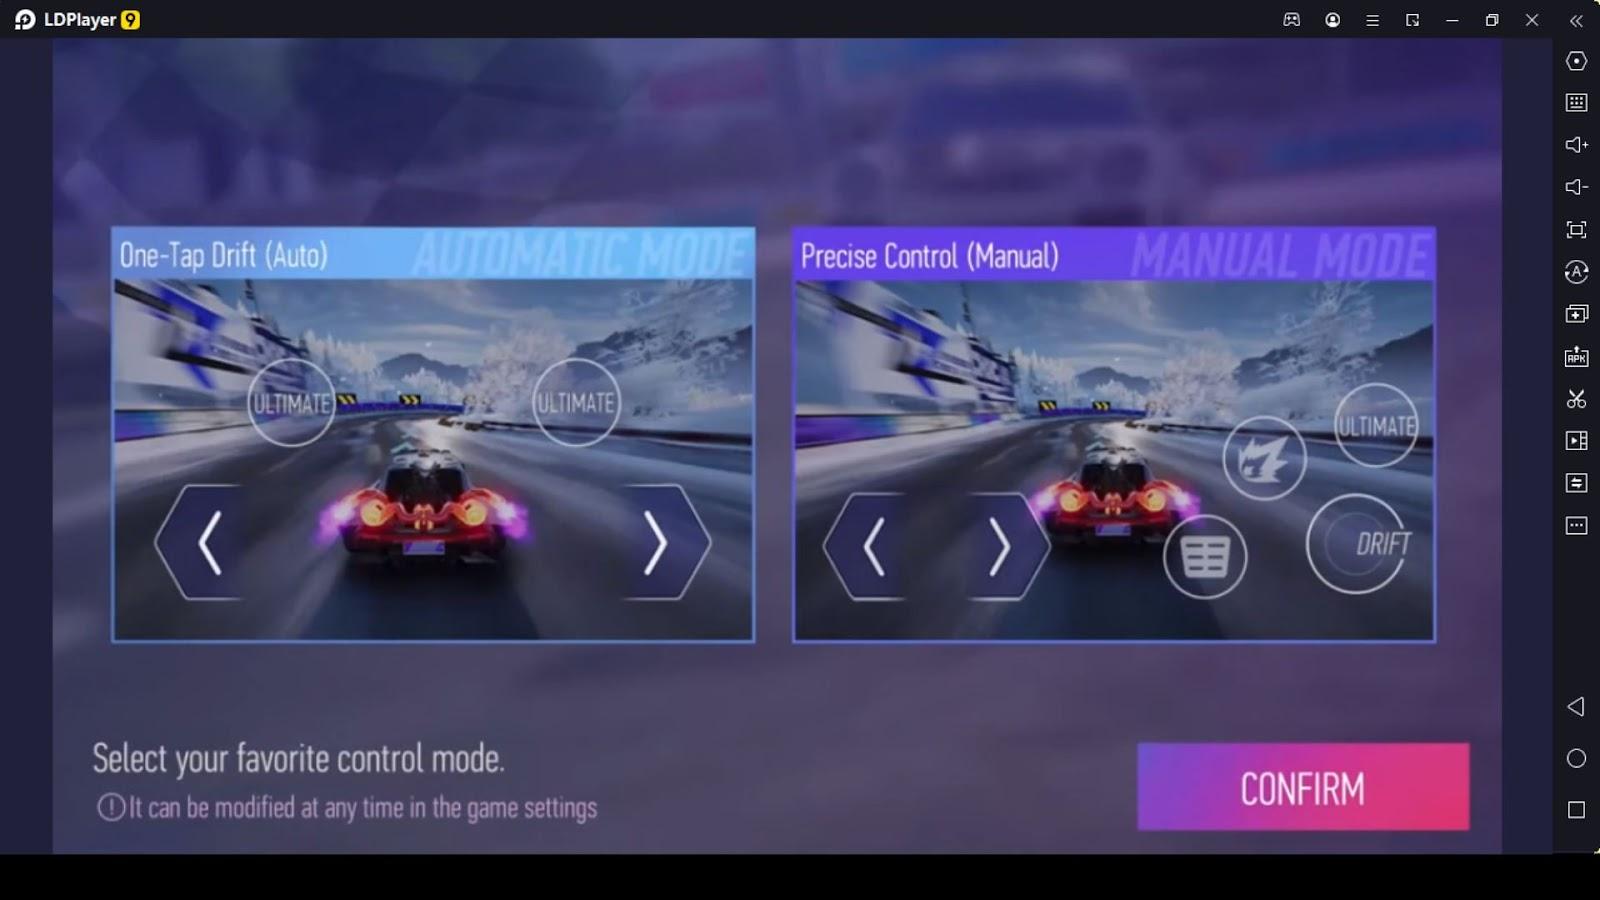 Select the Best Control Mode